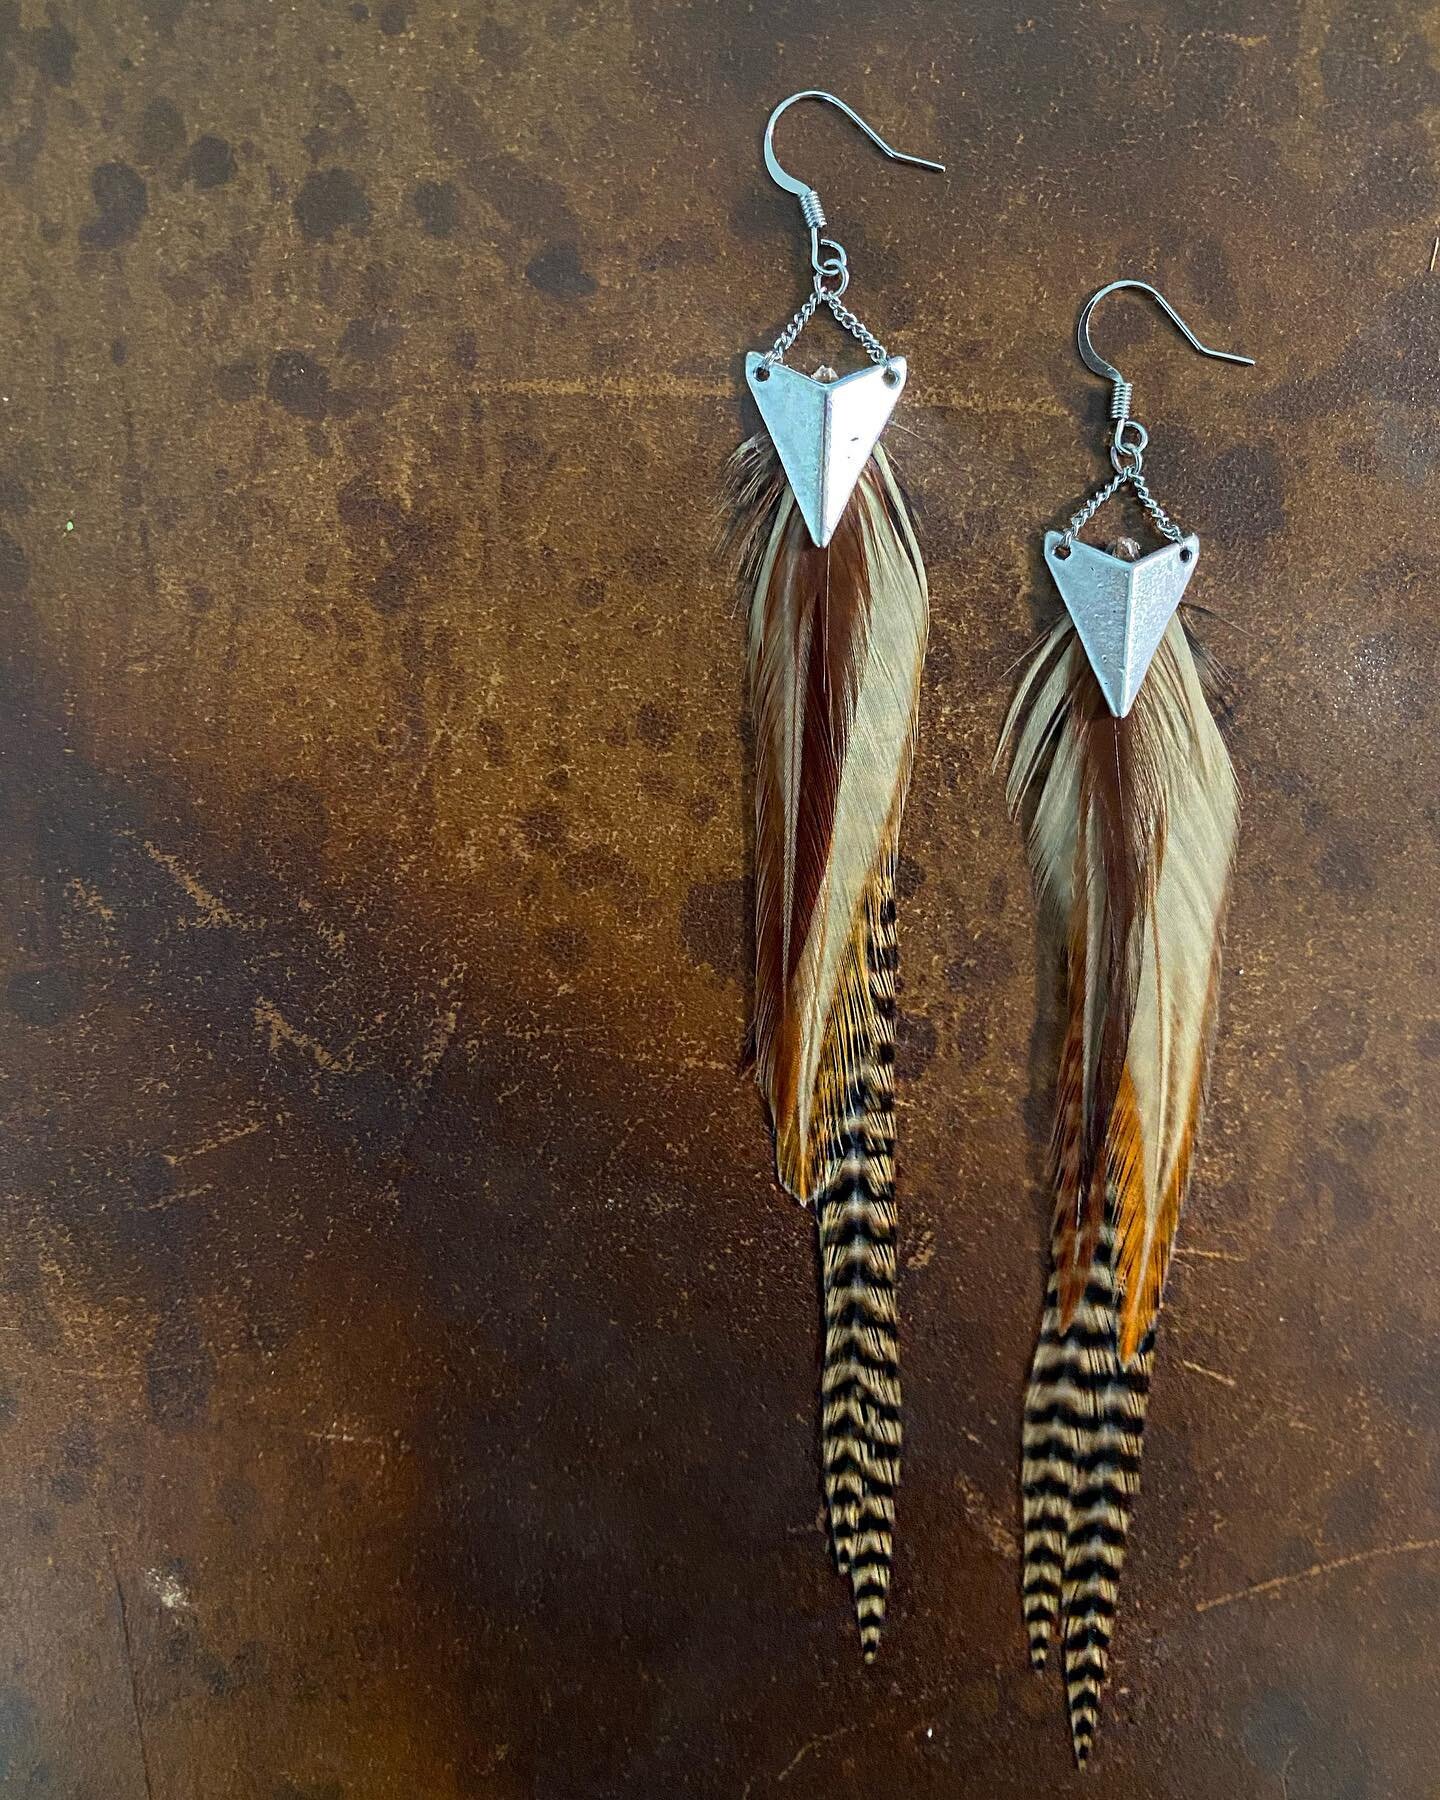 RW&rsquo;s :: Flip The Birdies :: in Tobacco and ginger saddle rooster and pheasant on silver 🪶 ✨
.
.
.
#roadworn #handmade #karahesse #tobaccocollection #karahessedesigns #musicmeetsfashion #birdies #featherjewelry #copper #hammeredcopper #earrings